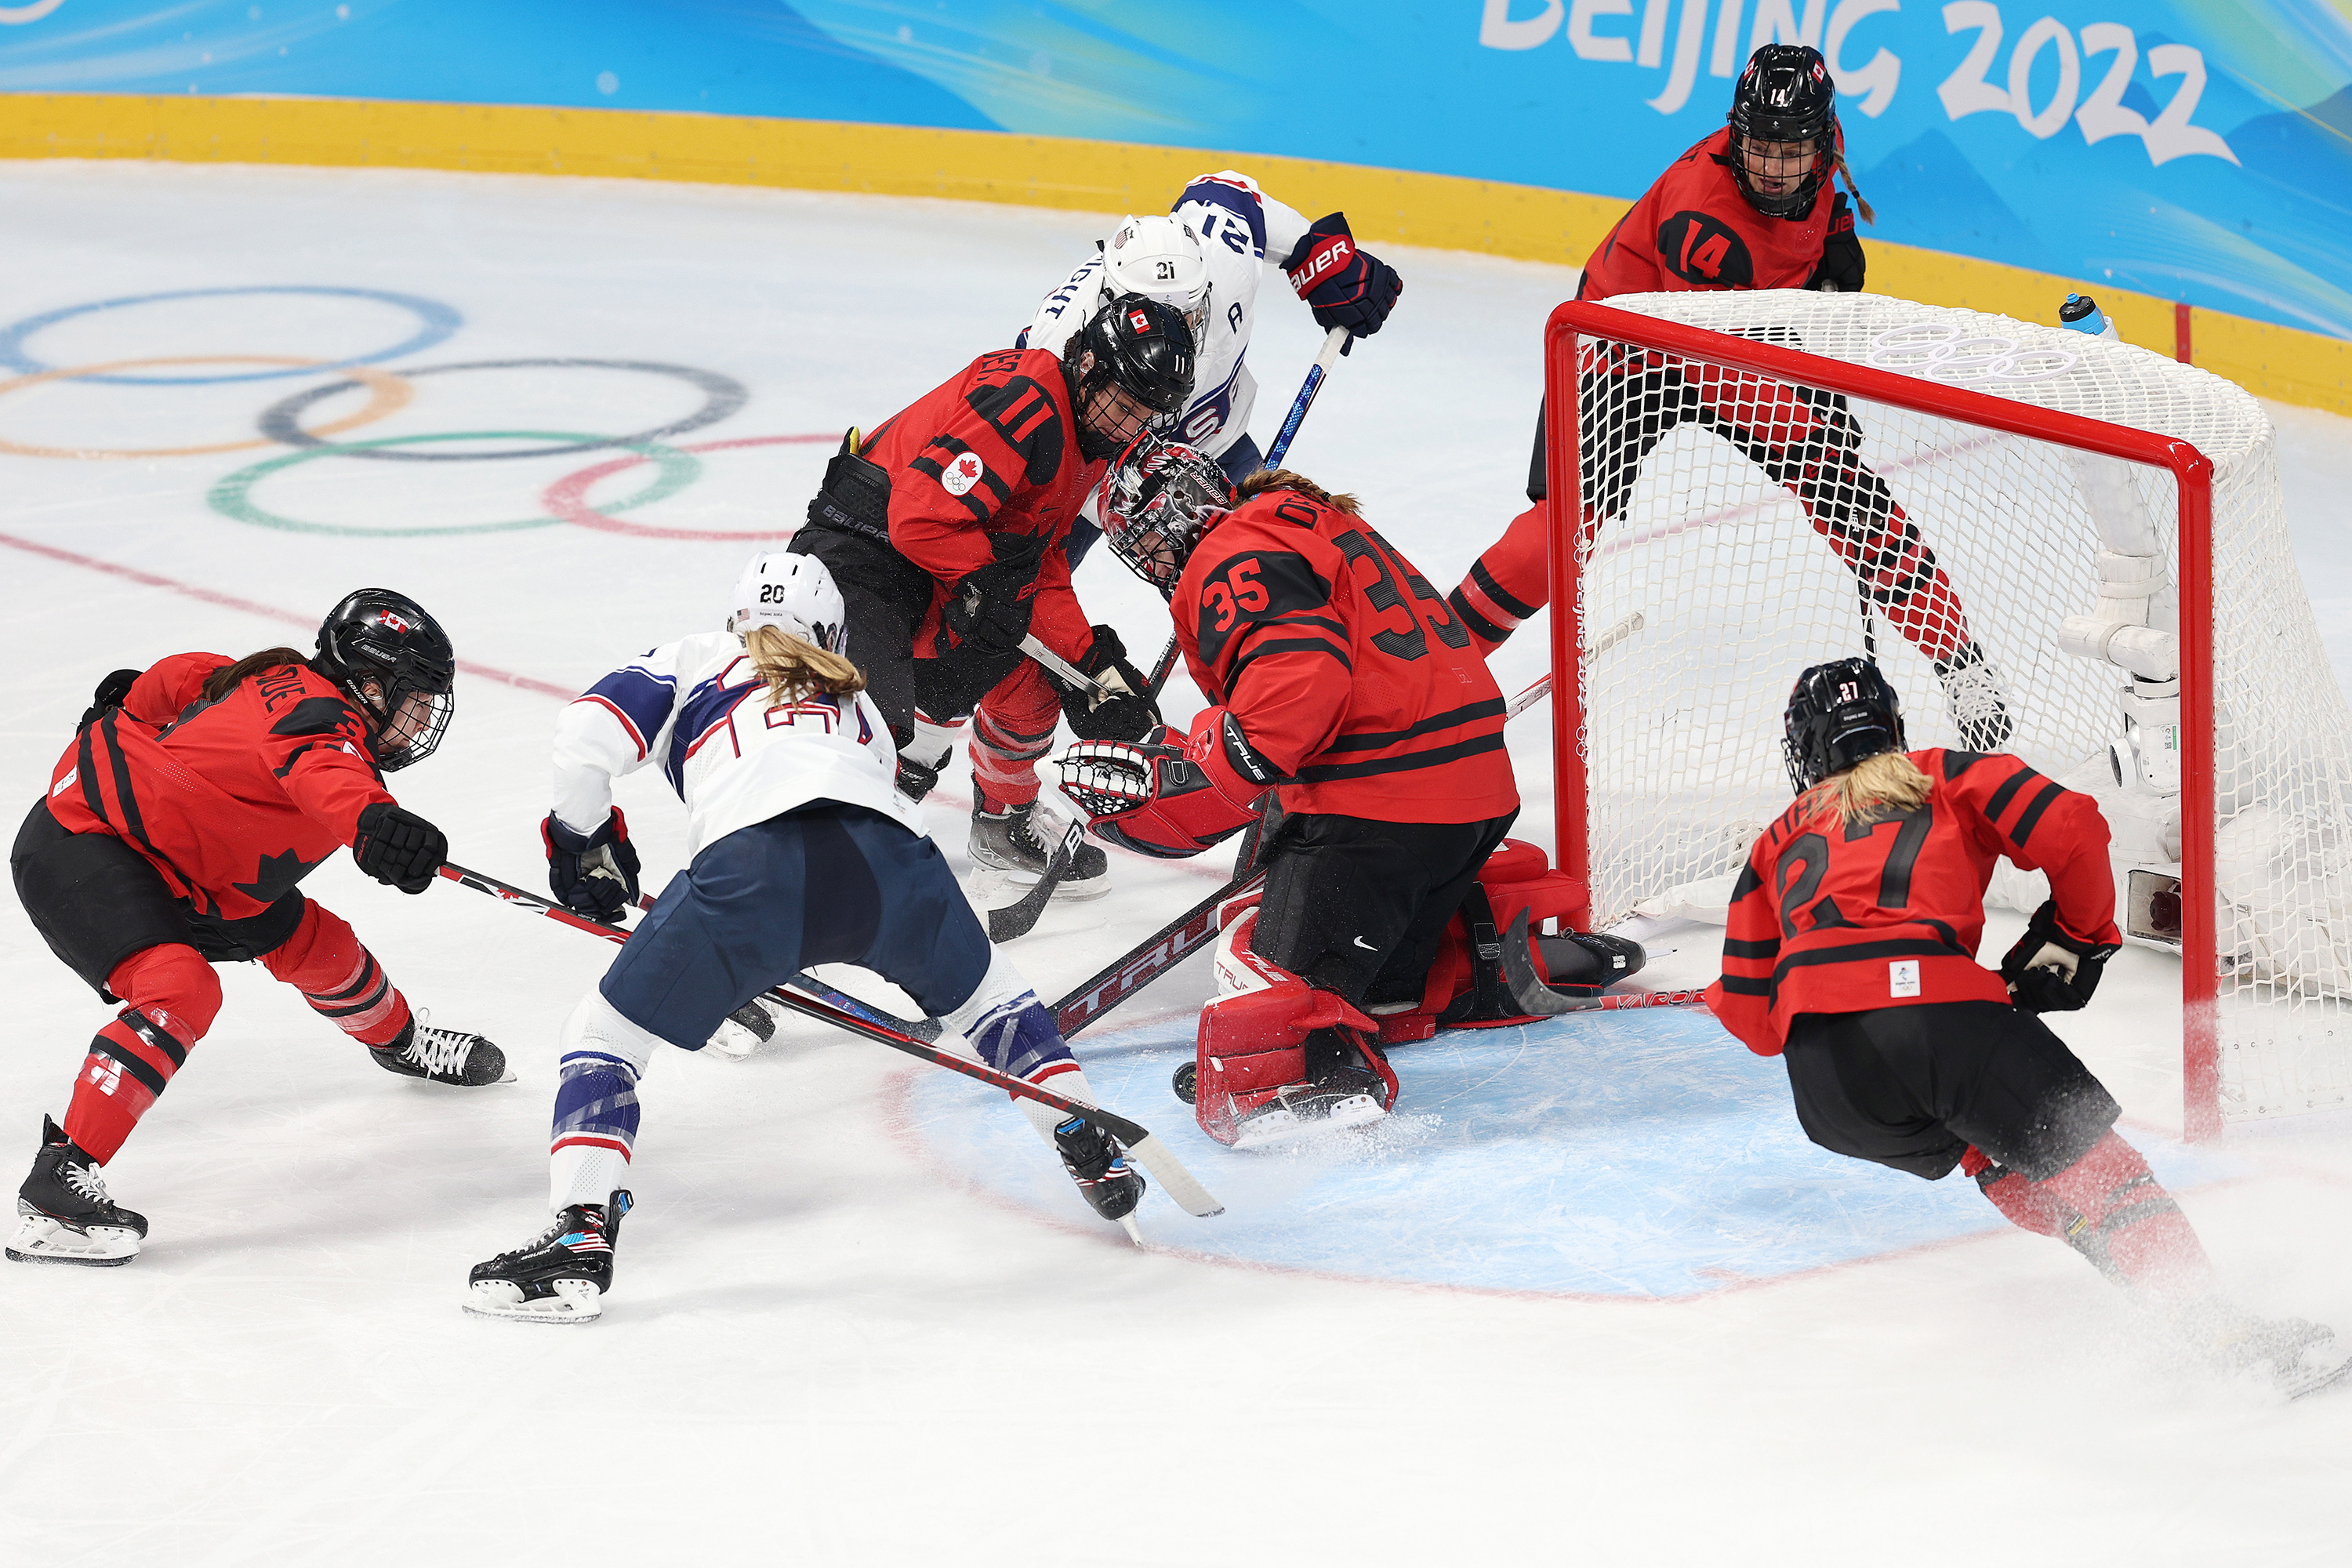 The United States and Canada went head to head again in the women's ice hockey gold medal match on Thursday.